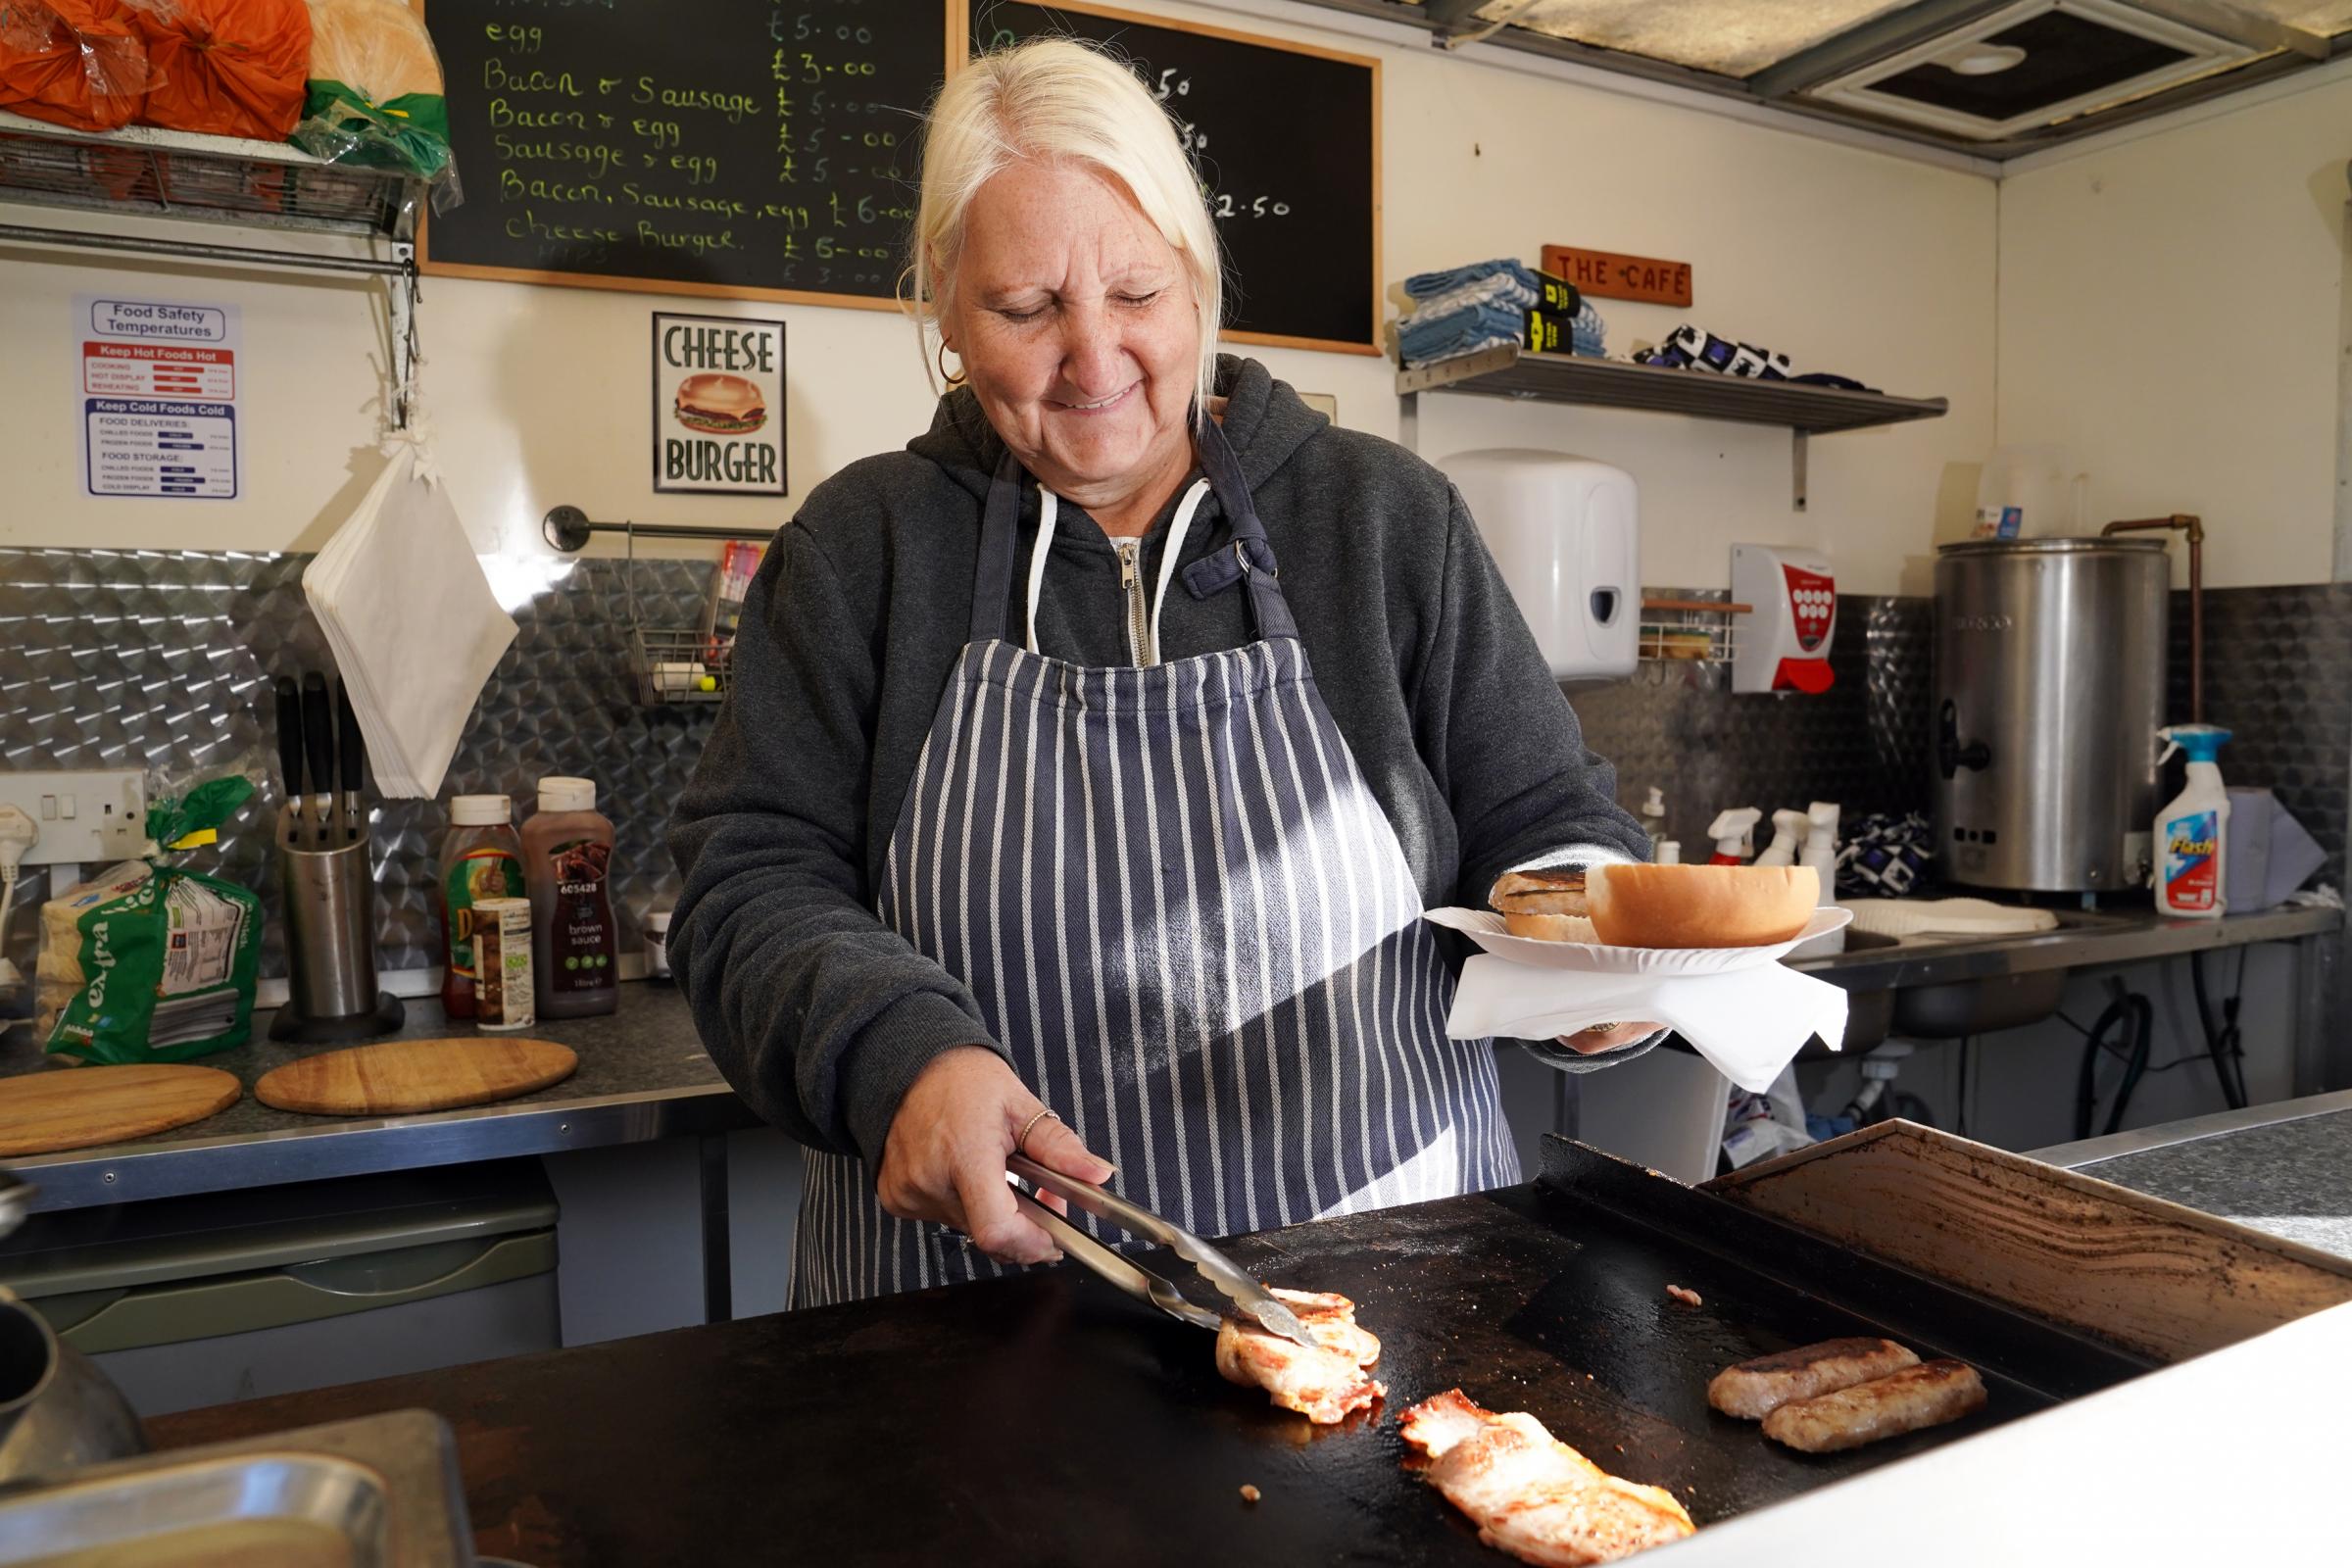 Catering van owner Joy Parkes is struggling to make ends meet due to the lack of business. Picture: Rob Davies